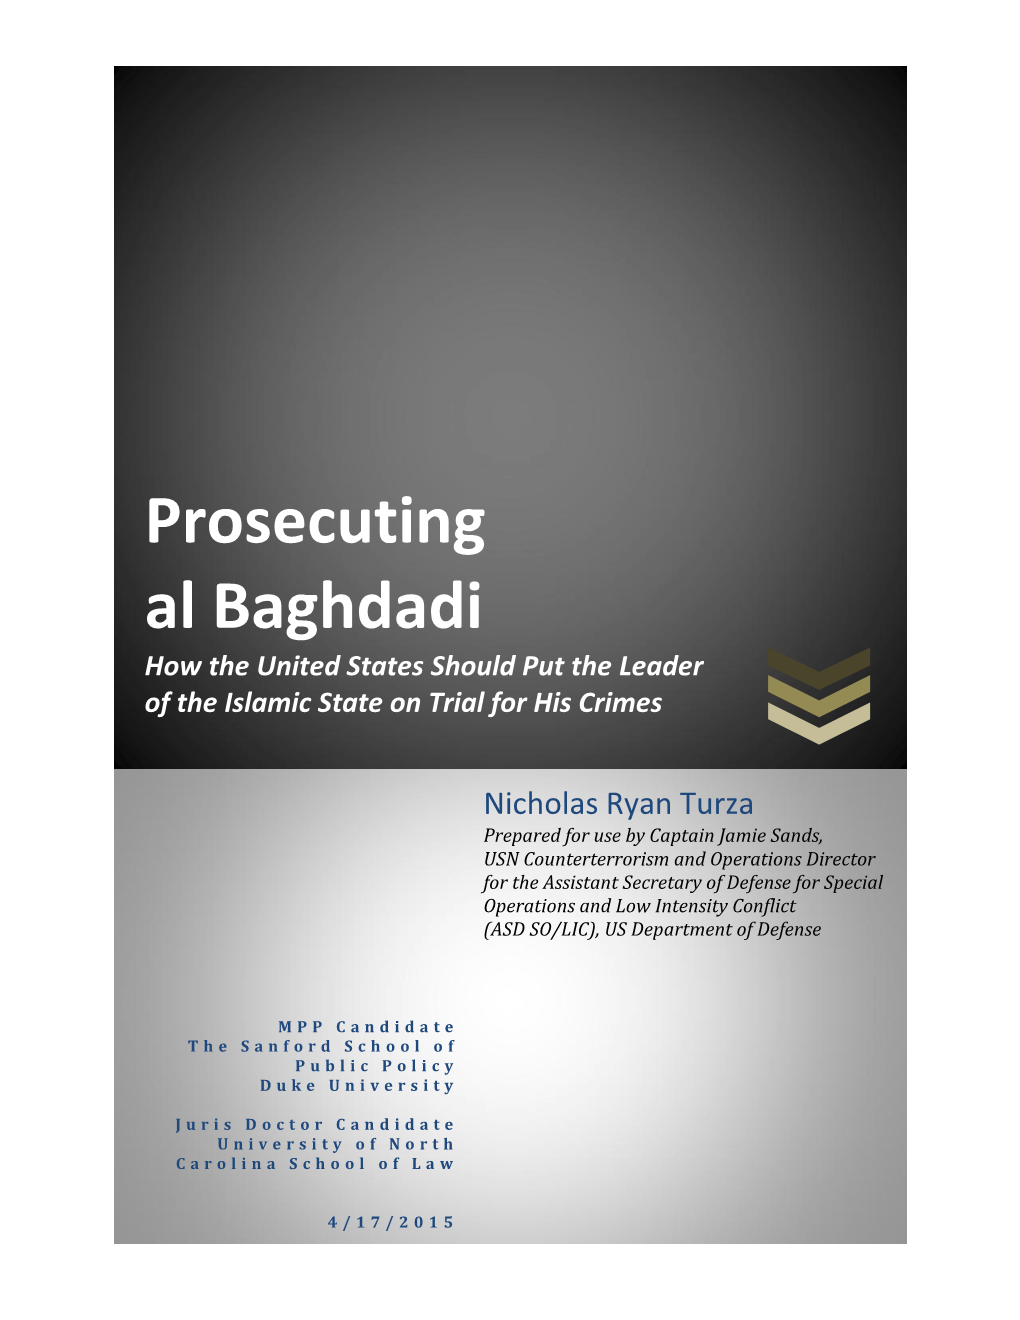 Prosecuting Al Baghdadi How the United States Should Put the Leader of the Islamic State on Trial for His Crimes